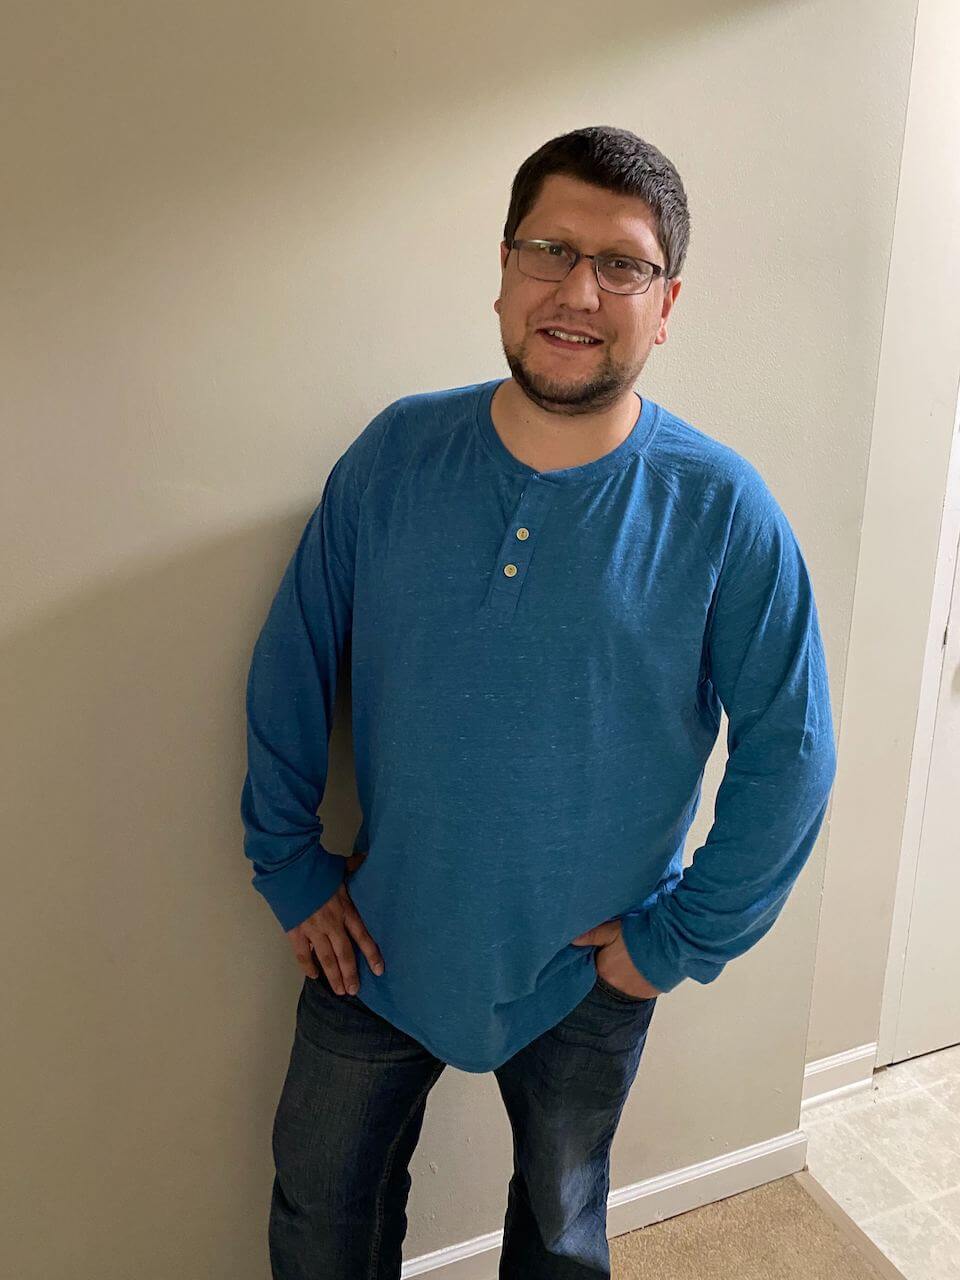 saj hoffman-hussein wearing blue shirt and jeans standing in front of a white wall.